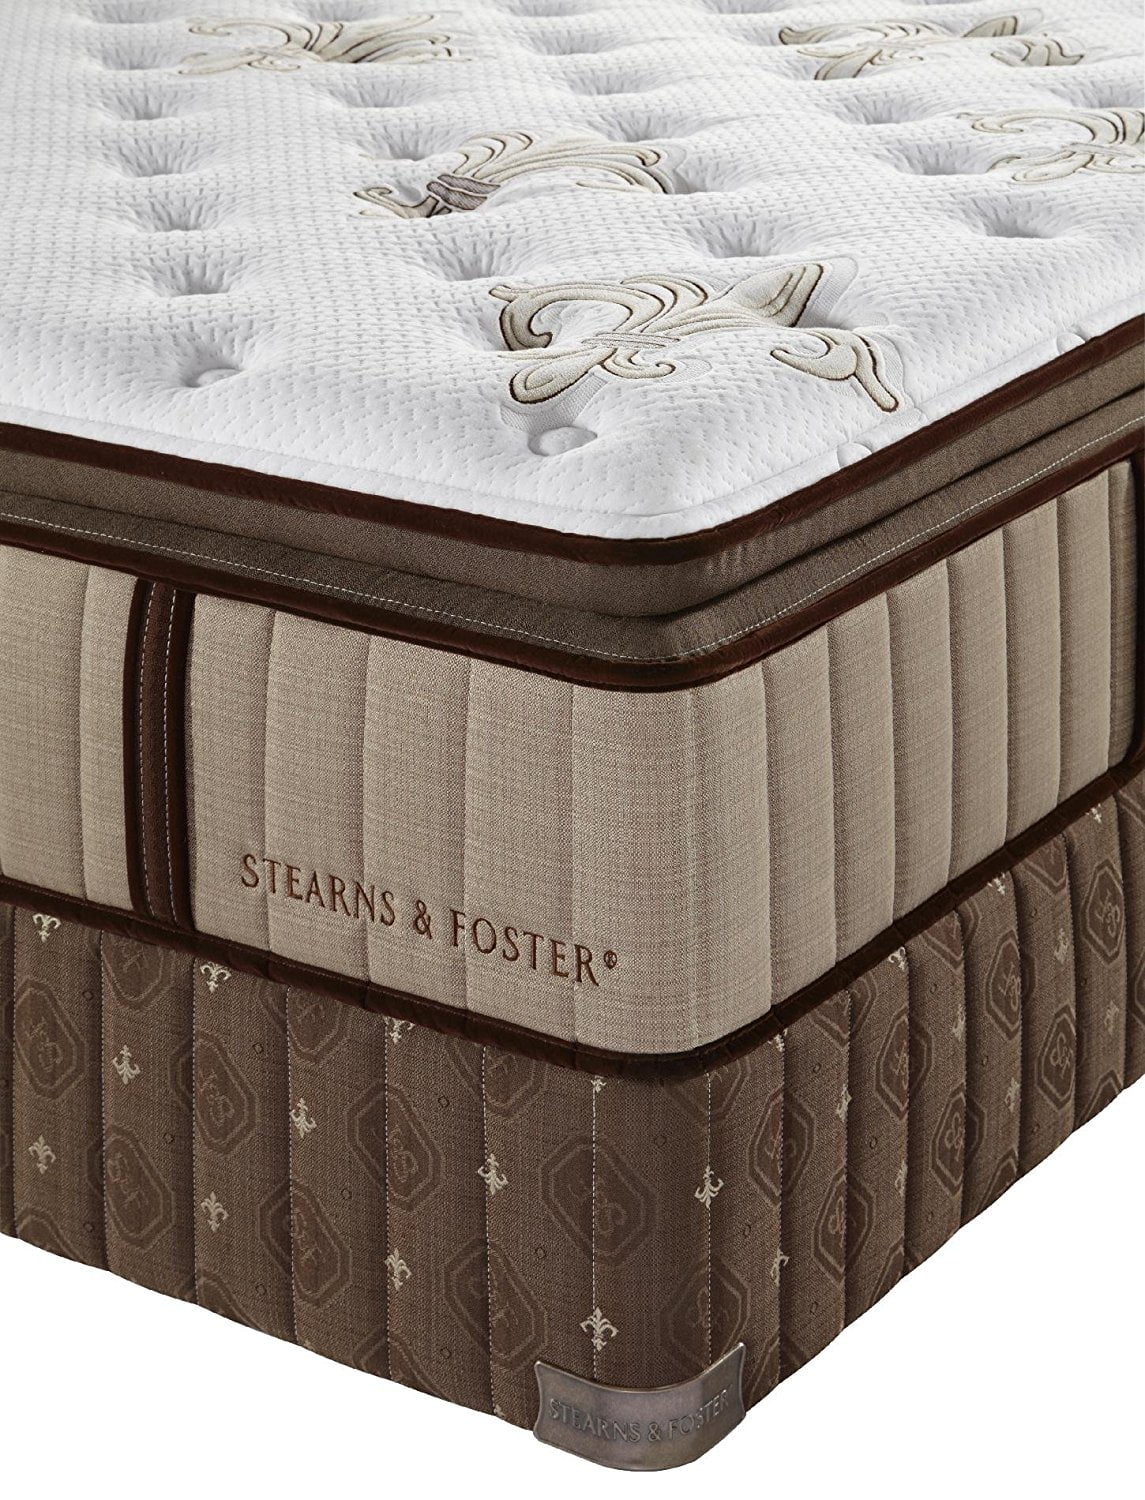 Luxury Plush Pillow Top Mattress King, Stearns And Foster King Bed